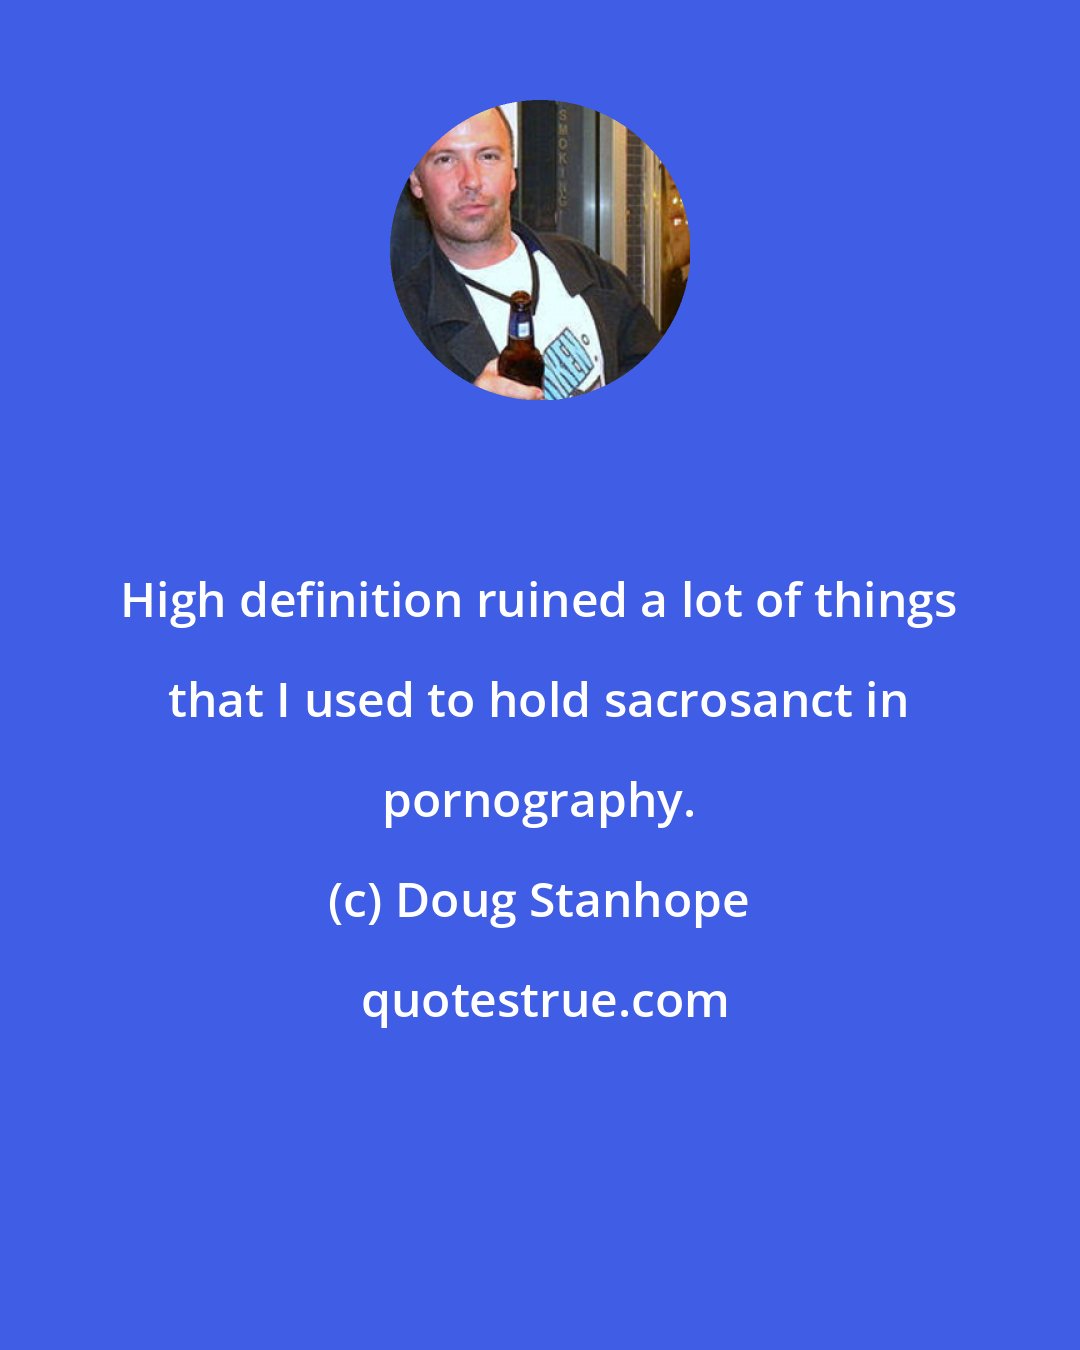 Doug Stanhope: High definition ruined a lot of things that I used to hold sacrosanct in pornography.